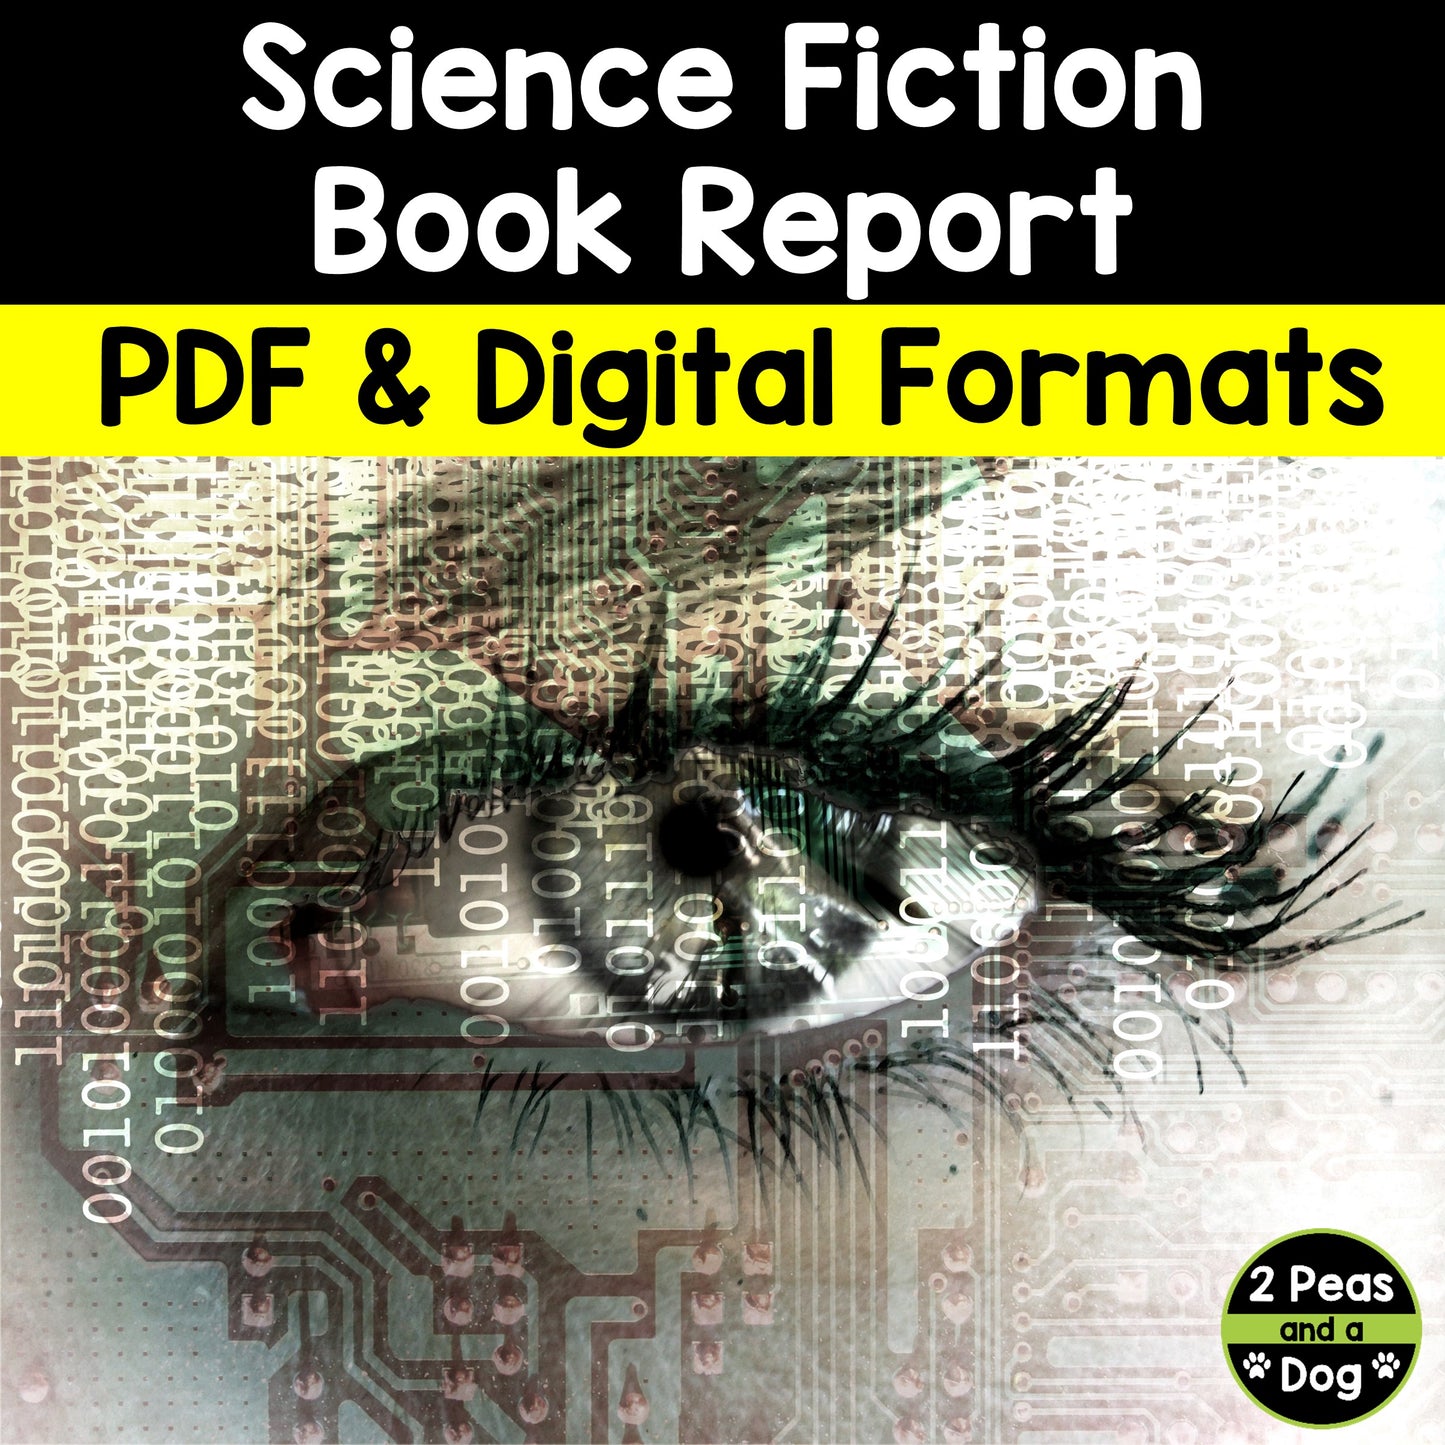 Science Fiction Book Report